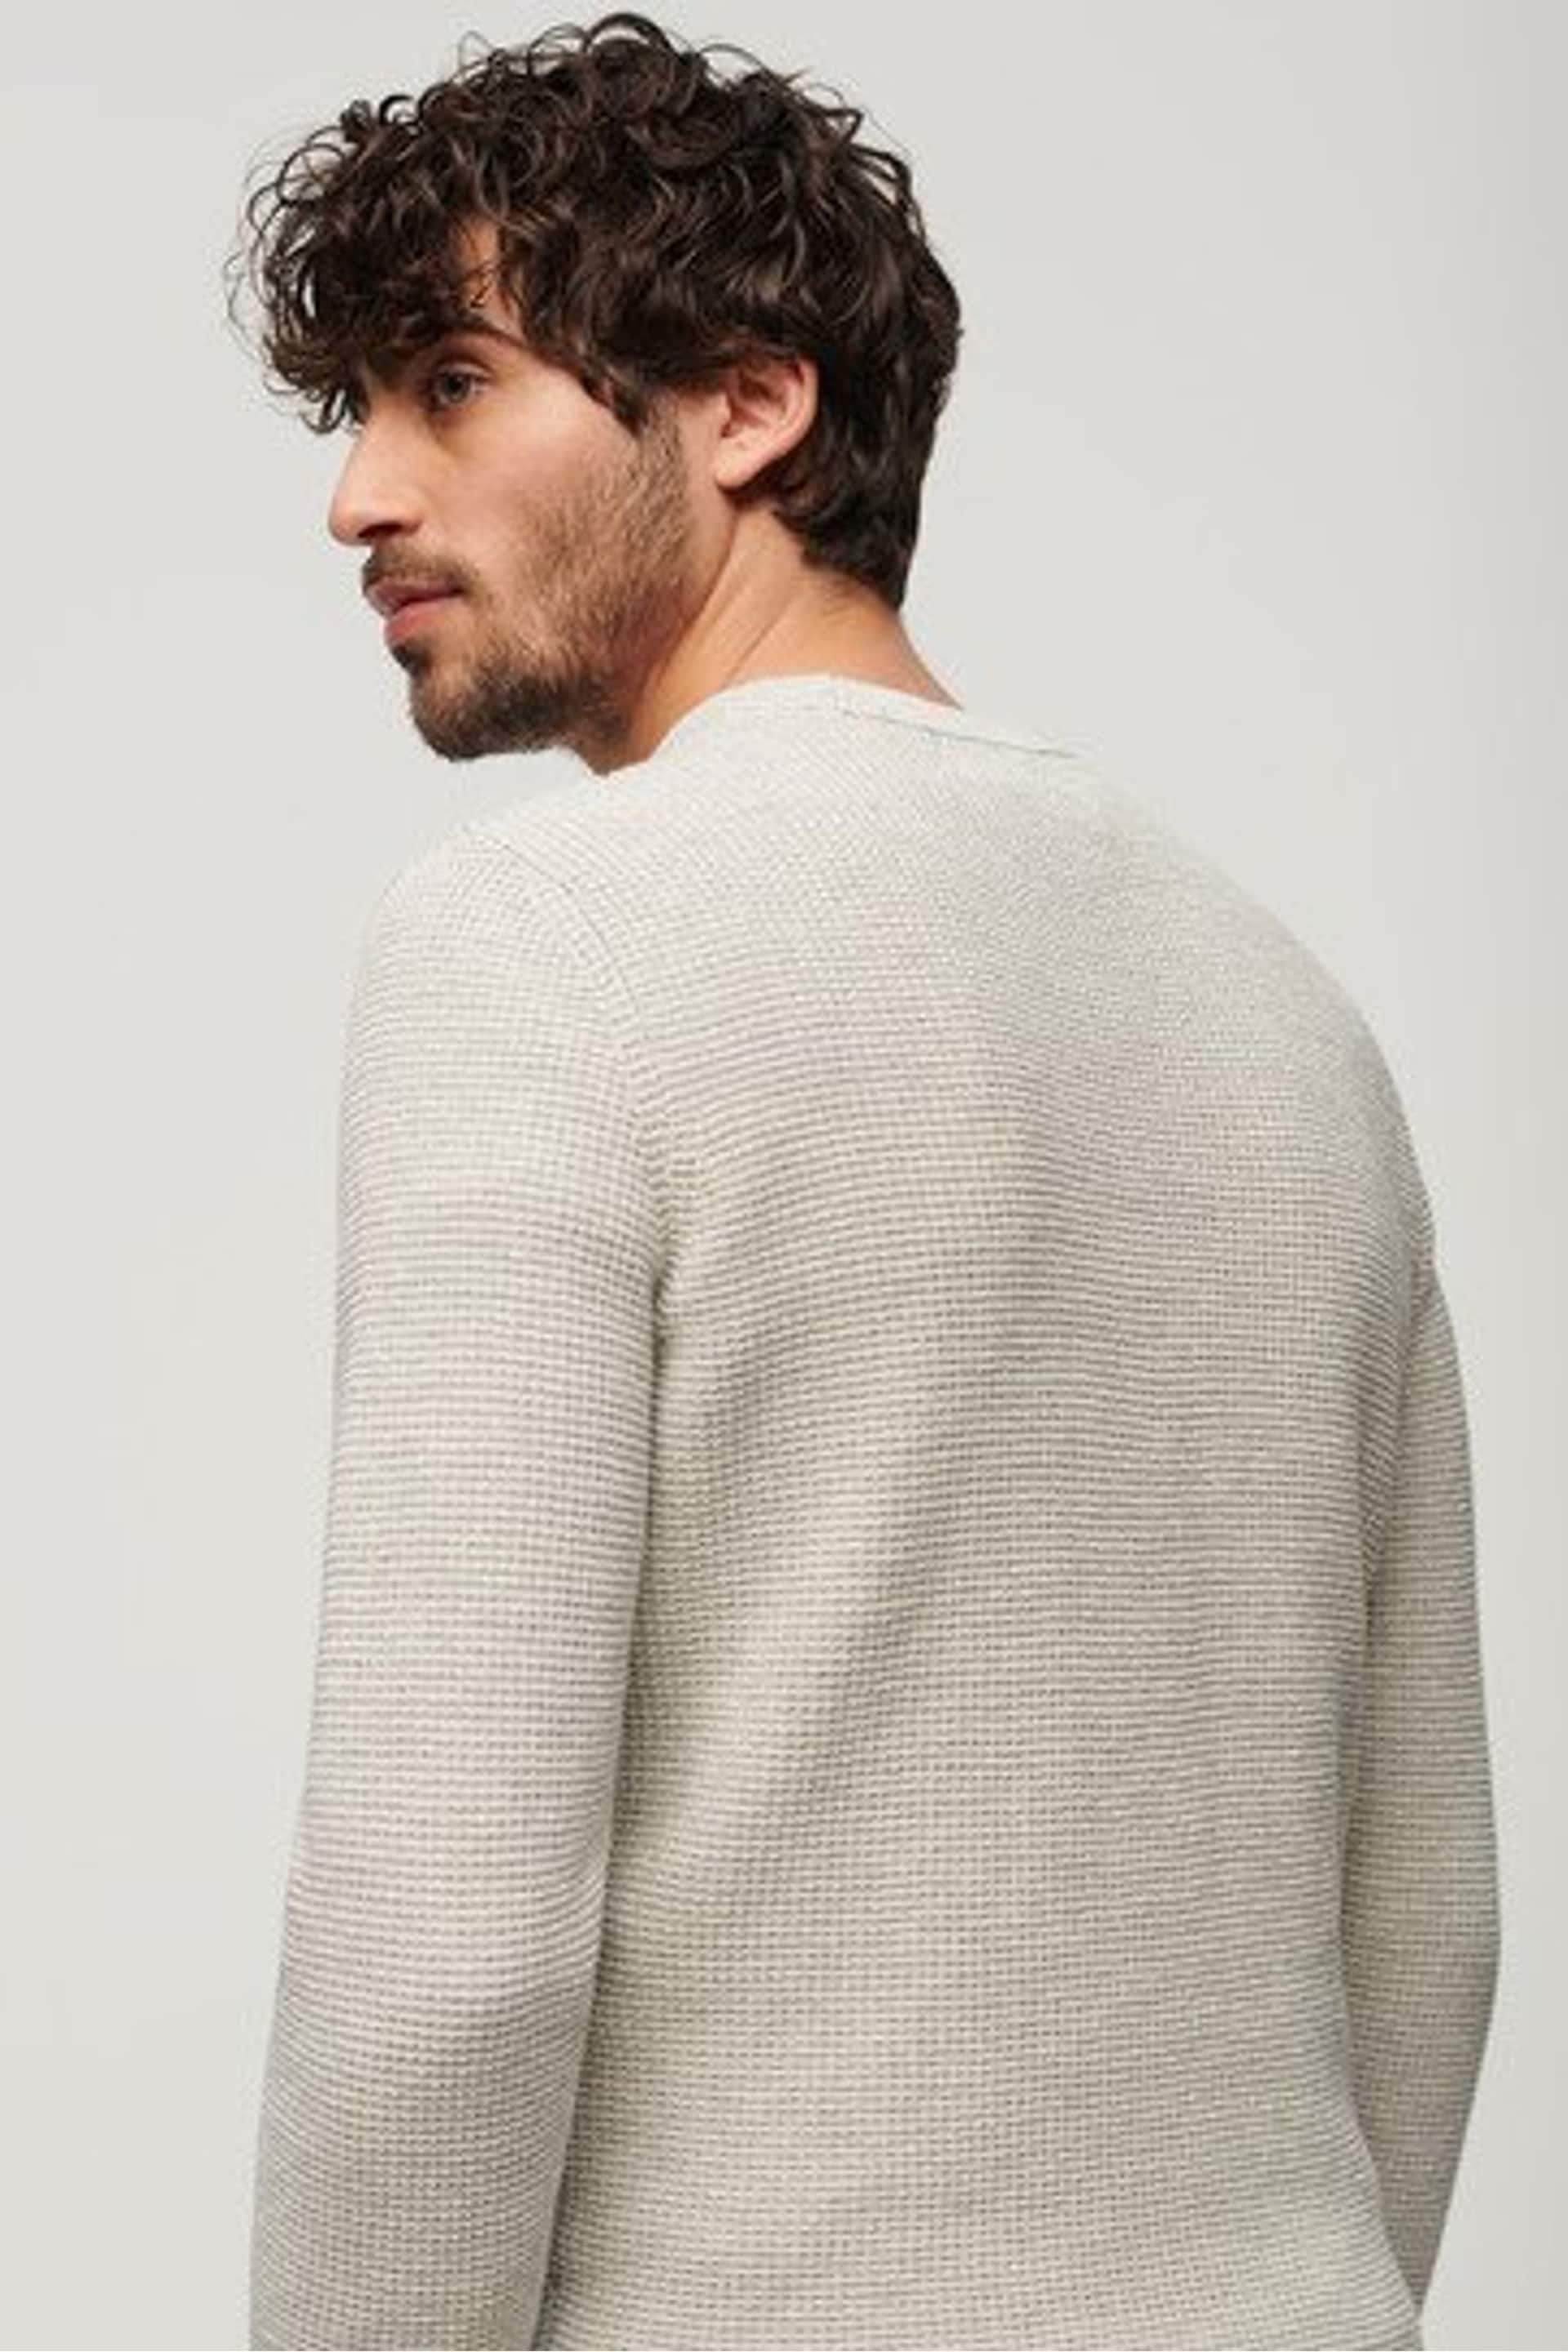 Superdry Grey Textured Crew Knitted Jumper - Image 3 of 6